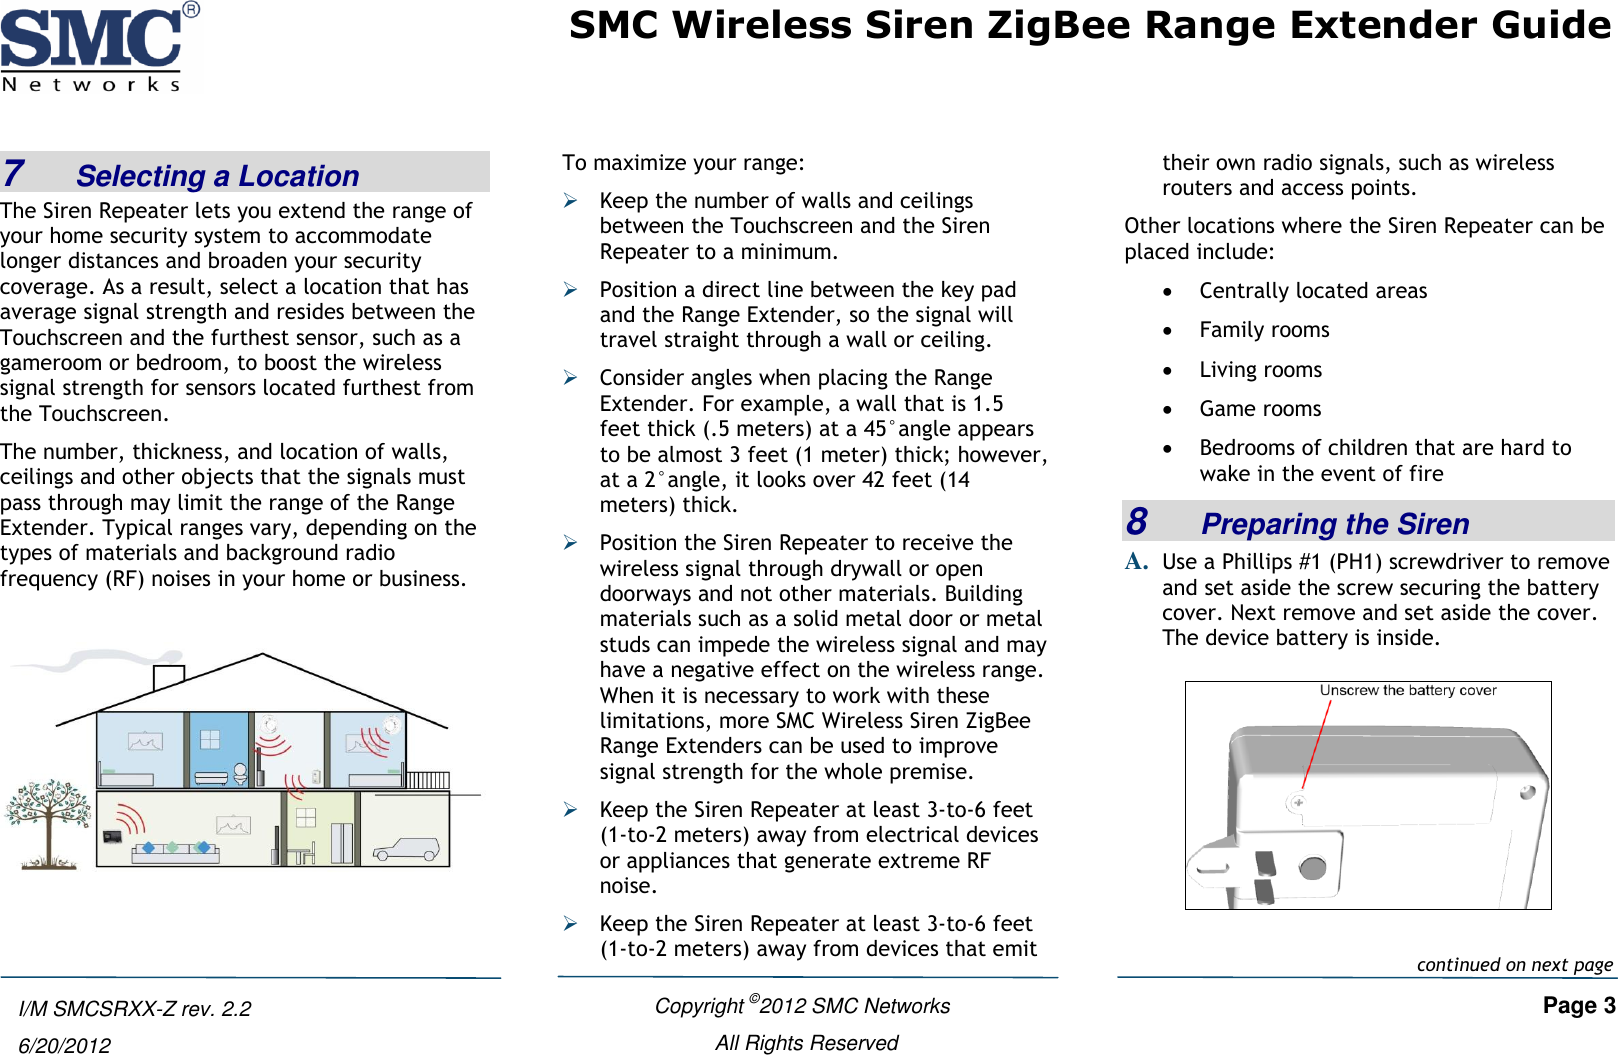 SMC Wireless Siren ZigBee Range Extender Guide   Copyright ©2012 SMC Networks   Page 3 All Rights Reserved  I/M SMCSRXX-Z rev. 2.2 6/20/2012 7    Selecting a Location The Siren Repeater lets you extend the range of your home security system to accommodate longer distances and broaden your security coverage. As a result, select a location that has average signal strength and resides between the Touchscreen and the furthest sensor, such as a gameroom or bedroom, to boost the wireless signal strength for sensors located furthest from the Touchscreen. The number, thickness, and location of walls, ceilings and other objects that the signals must pass through may limit the range of the Range Extender. Typical ranges vary, depending on the types of materials and background radio frequency (RF) noises in your home or business.   To maximize your range:  Keep the number of walls and ceilings between the Touchscreen and the Siren Repeater to a minimum.  Position a direct line between the key pad and the Range Extender, so the signal will travel straight through a wall or ceiling.   Consider angles when placing the Range Extender. For example, a wall that is 1.5 feet thick (.5 meters) at a 45°angle appears to be almost 3 feet (1 meter) thick; however, at a 2°angle, it looks over 42 feet (14 meters) thick.  Position the Siren Repeater to receive the wireless signal through drywall or open doorways and not other materials. Building materials such as a solid metal door or metal studs can impede the wireless signal and may have a negative effect on the wireless range. When it is necessary to work with these limitations, more SMC Wireless Siren ZigBee Range Extenders can be used to improve signal strength for the whole premise.  Keep the Siren Repeater at least 3-to-6 feet (1-to-2 meters) away from electrical devices or appliances that generate extreme RF noise.  Keep the Siren Repeater at least 3-to-6 feet (1-to-2 meters) away from devices that emit their own radio signals, such as wireless routers and access points. Other locations where the Siren Repeater can be placed include:  Centrally located areas  Family rooms  Living rooms  Game rooms  Bedrooms of children that are hard to wake in the event of fire 8    Preparing the Siren A. Use a Phillips #1 (PH1) screwdriver to remove and set aside the screw securing the battery cover. Next remove and set aside the cover. The device battery is inside.    continued on next page 